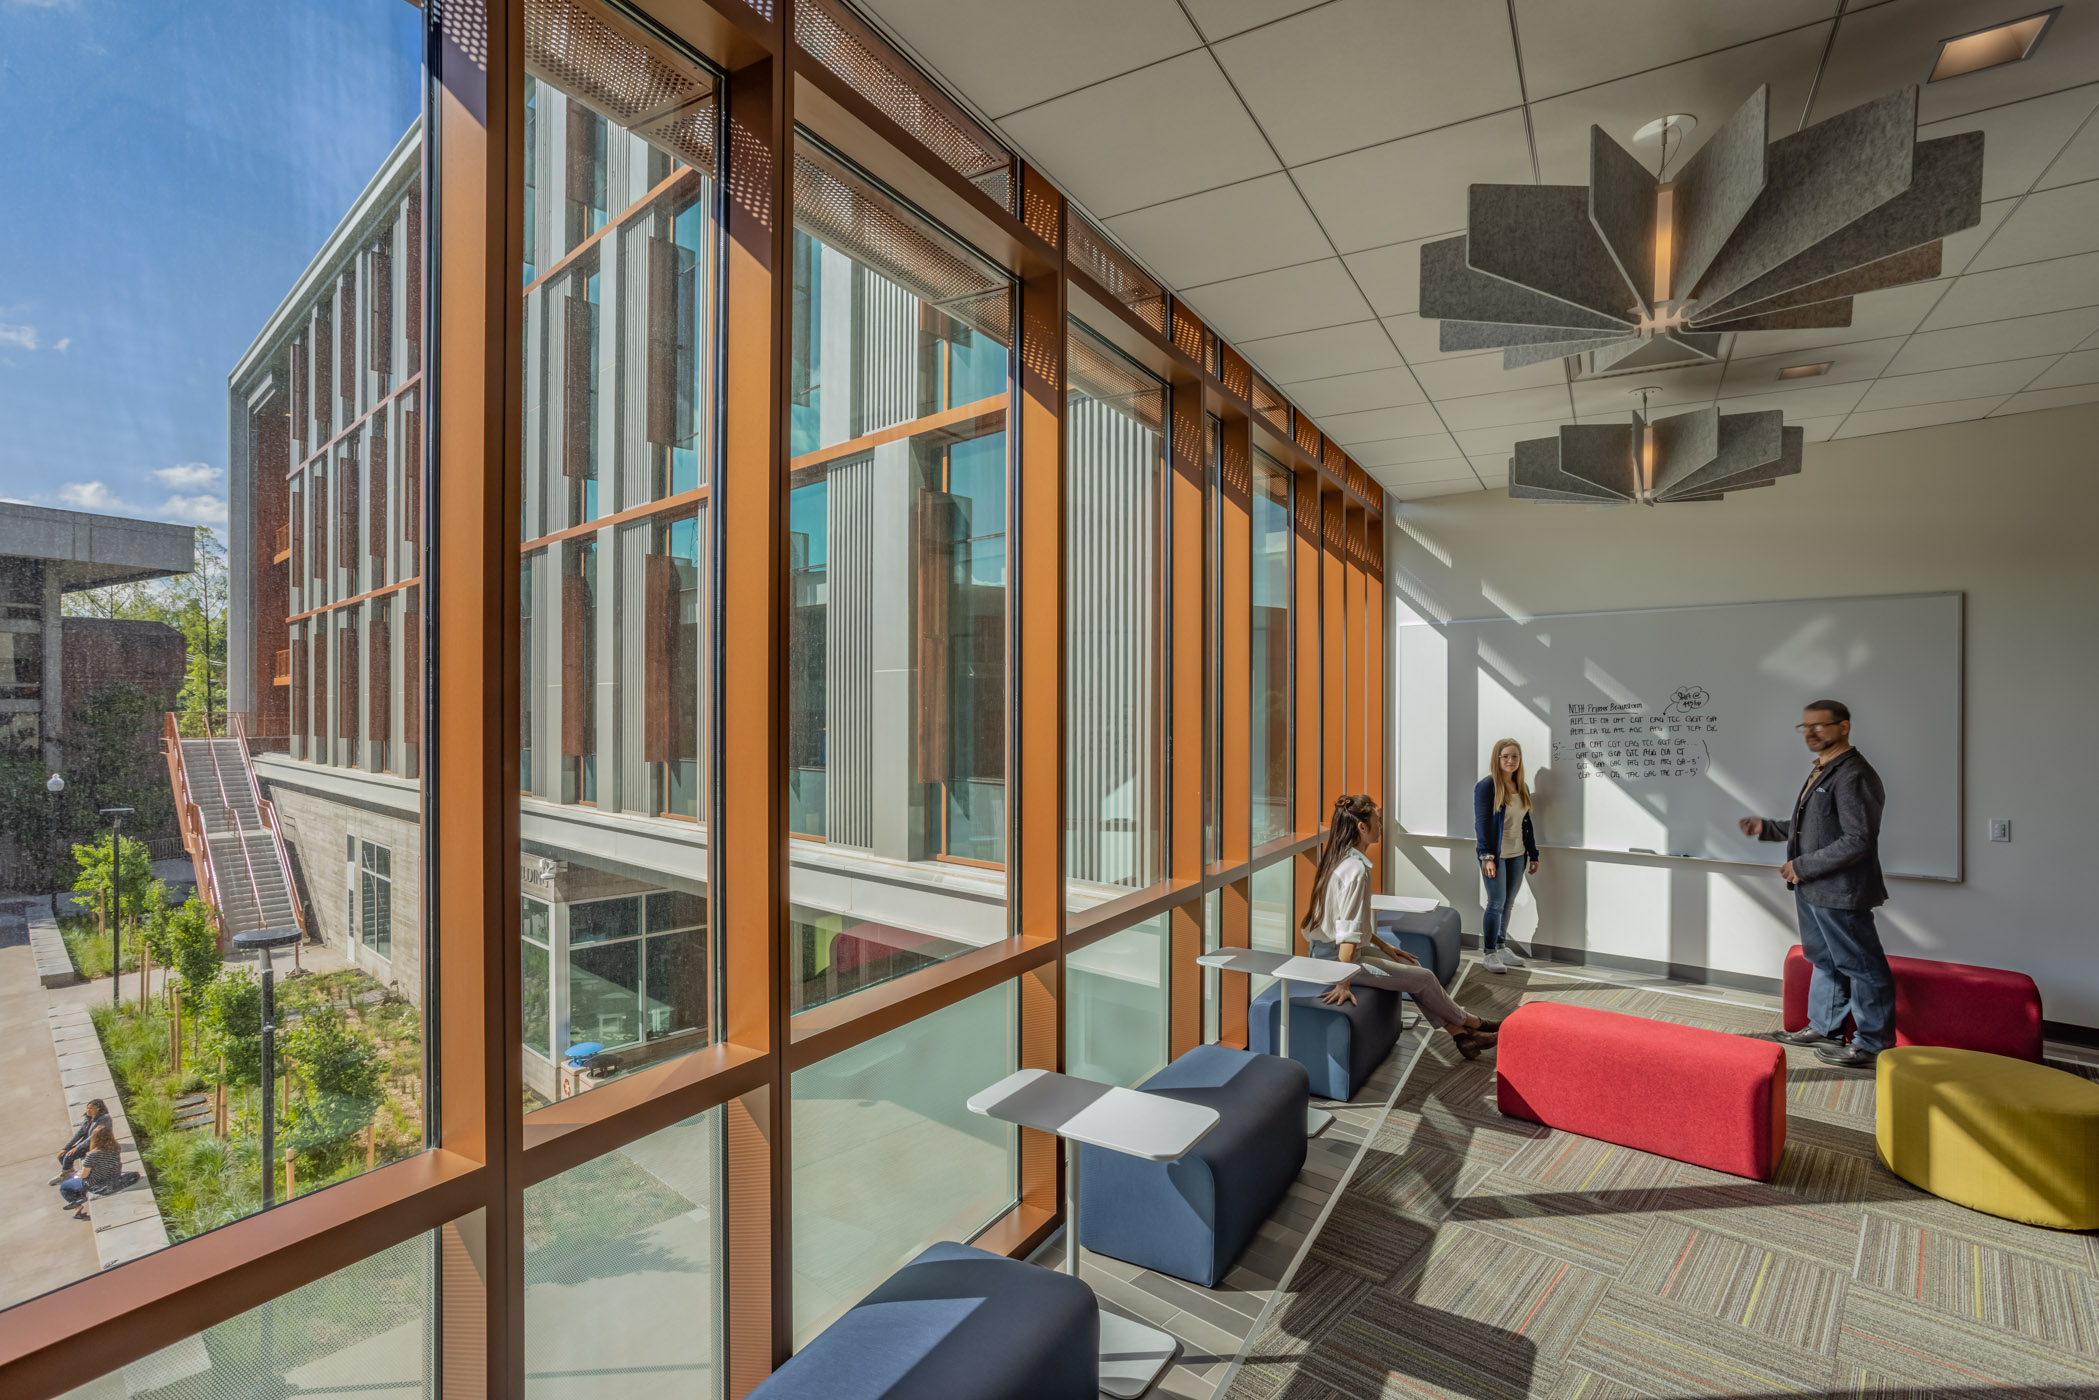 4-21_Smithgroup_ChicoState-251-Edit_InstitutionsGallery